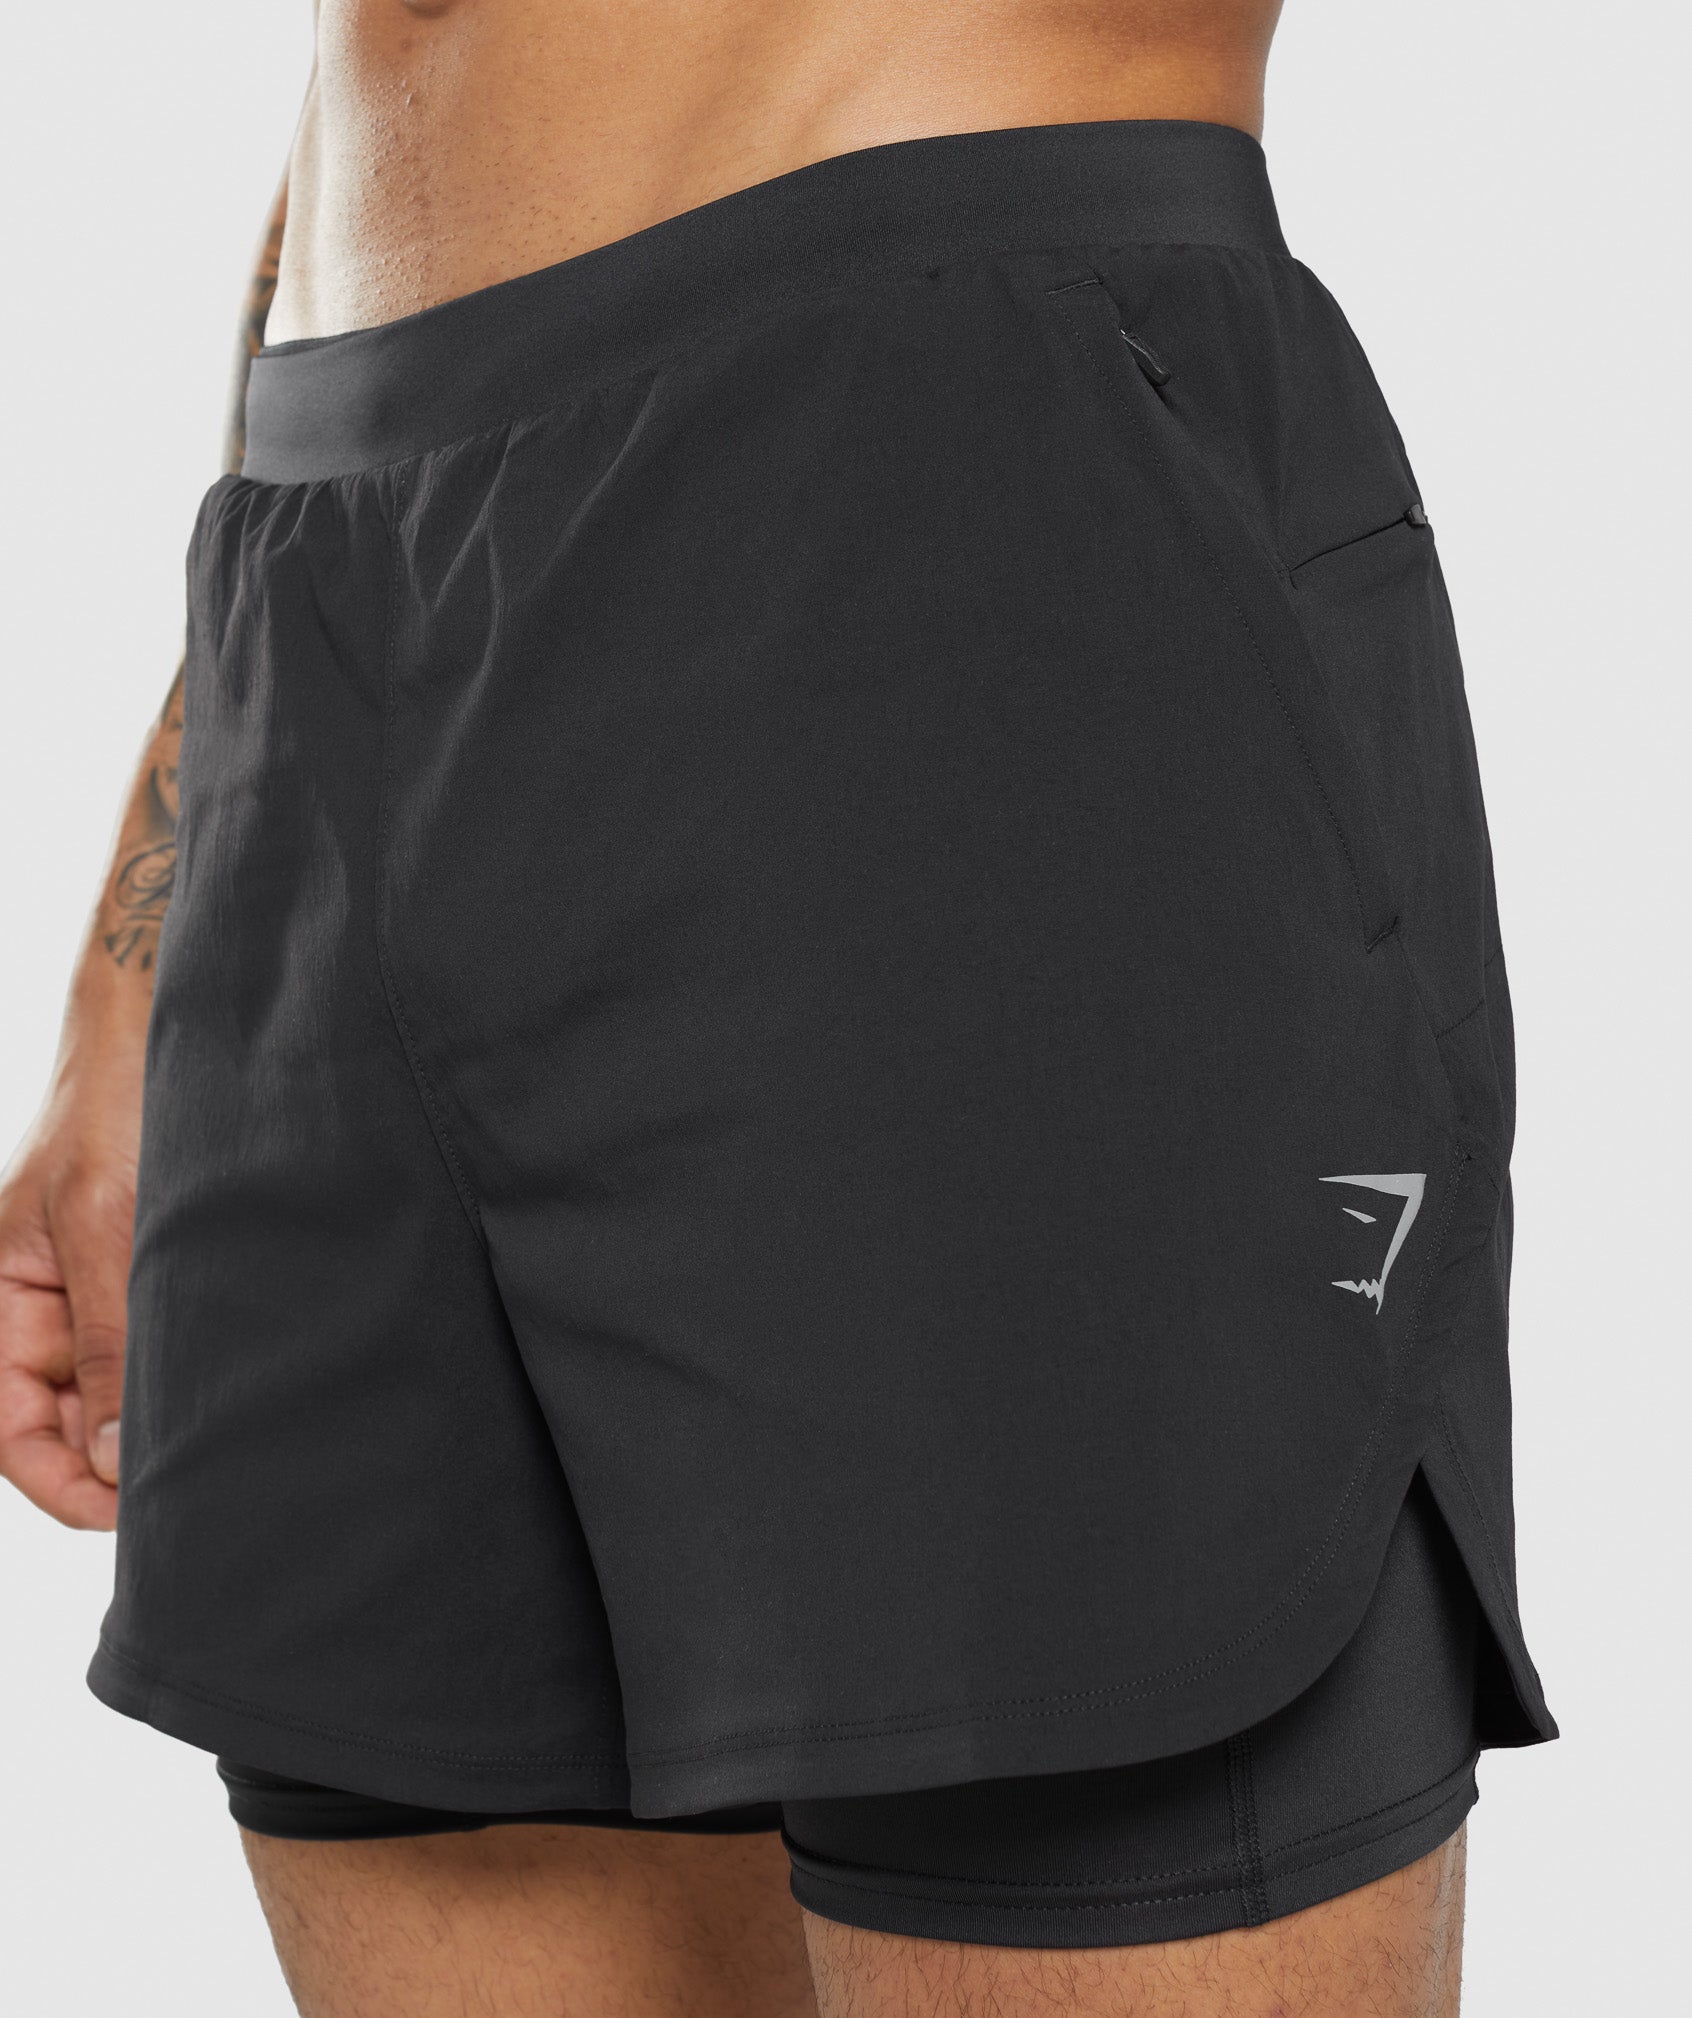 Speed Evolve 5" 2 In 1 Shorts in Black - view 6